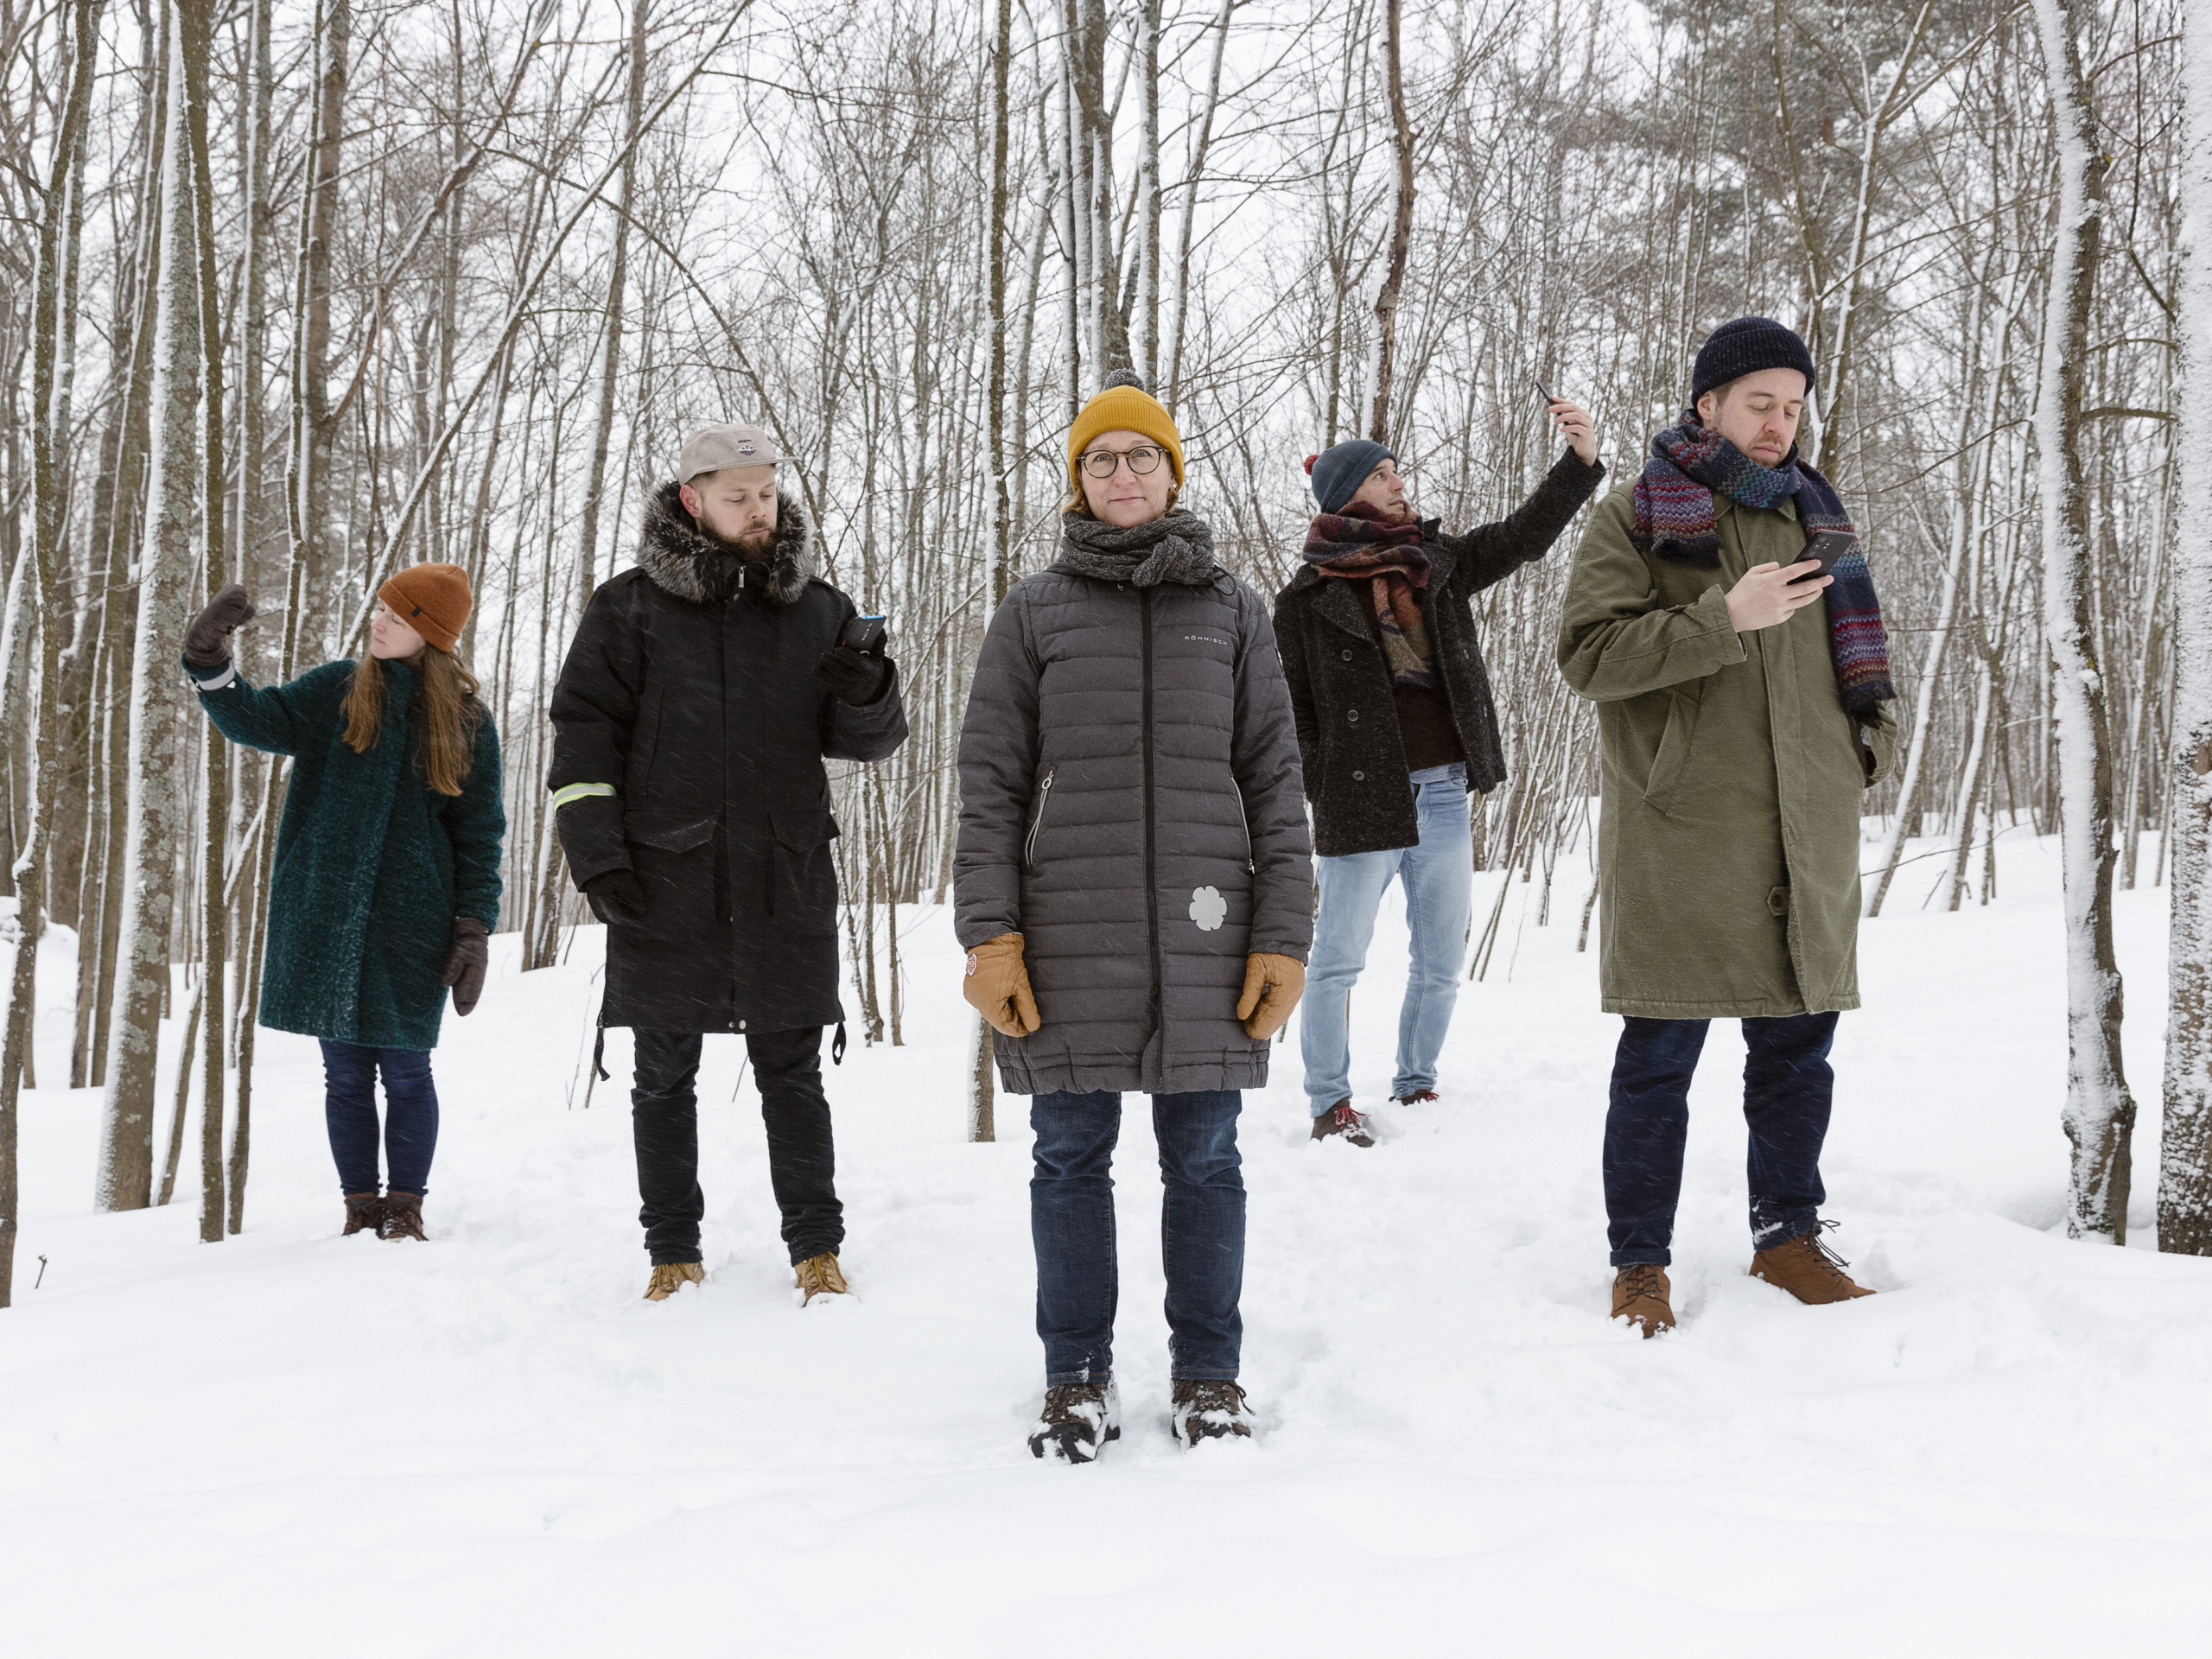 Researchers are standing in a snowy forest with phones in their hands.